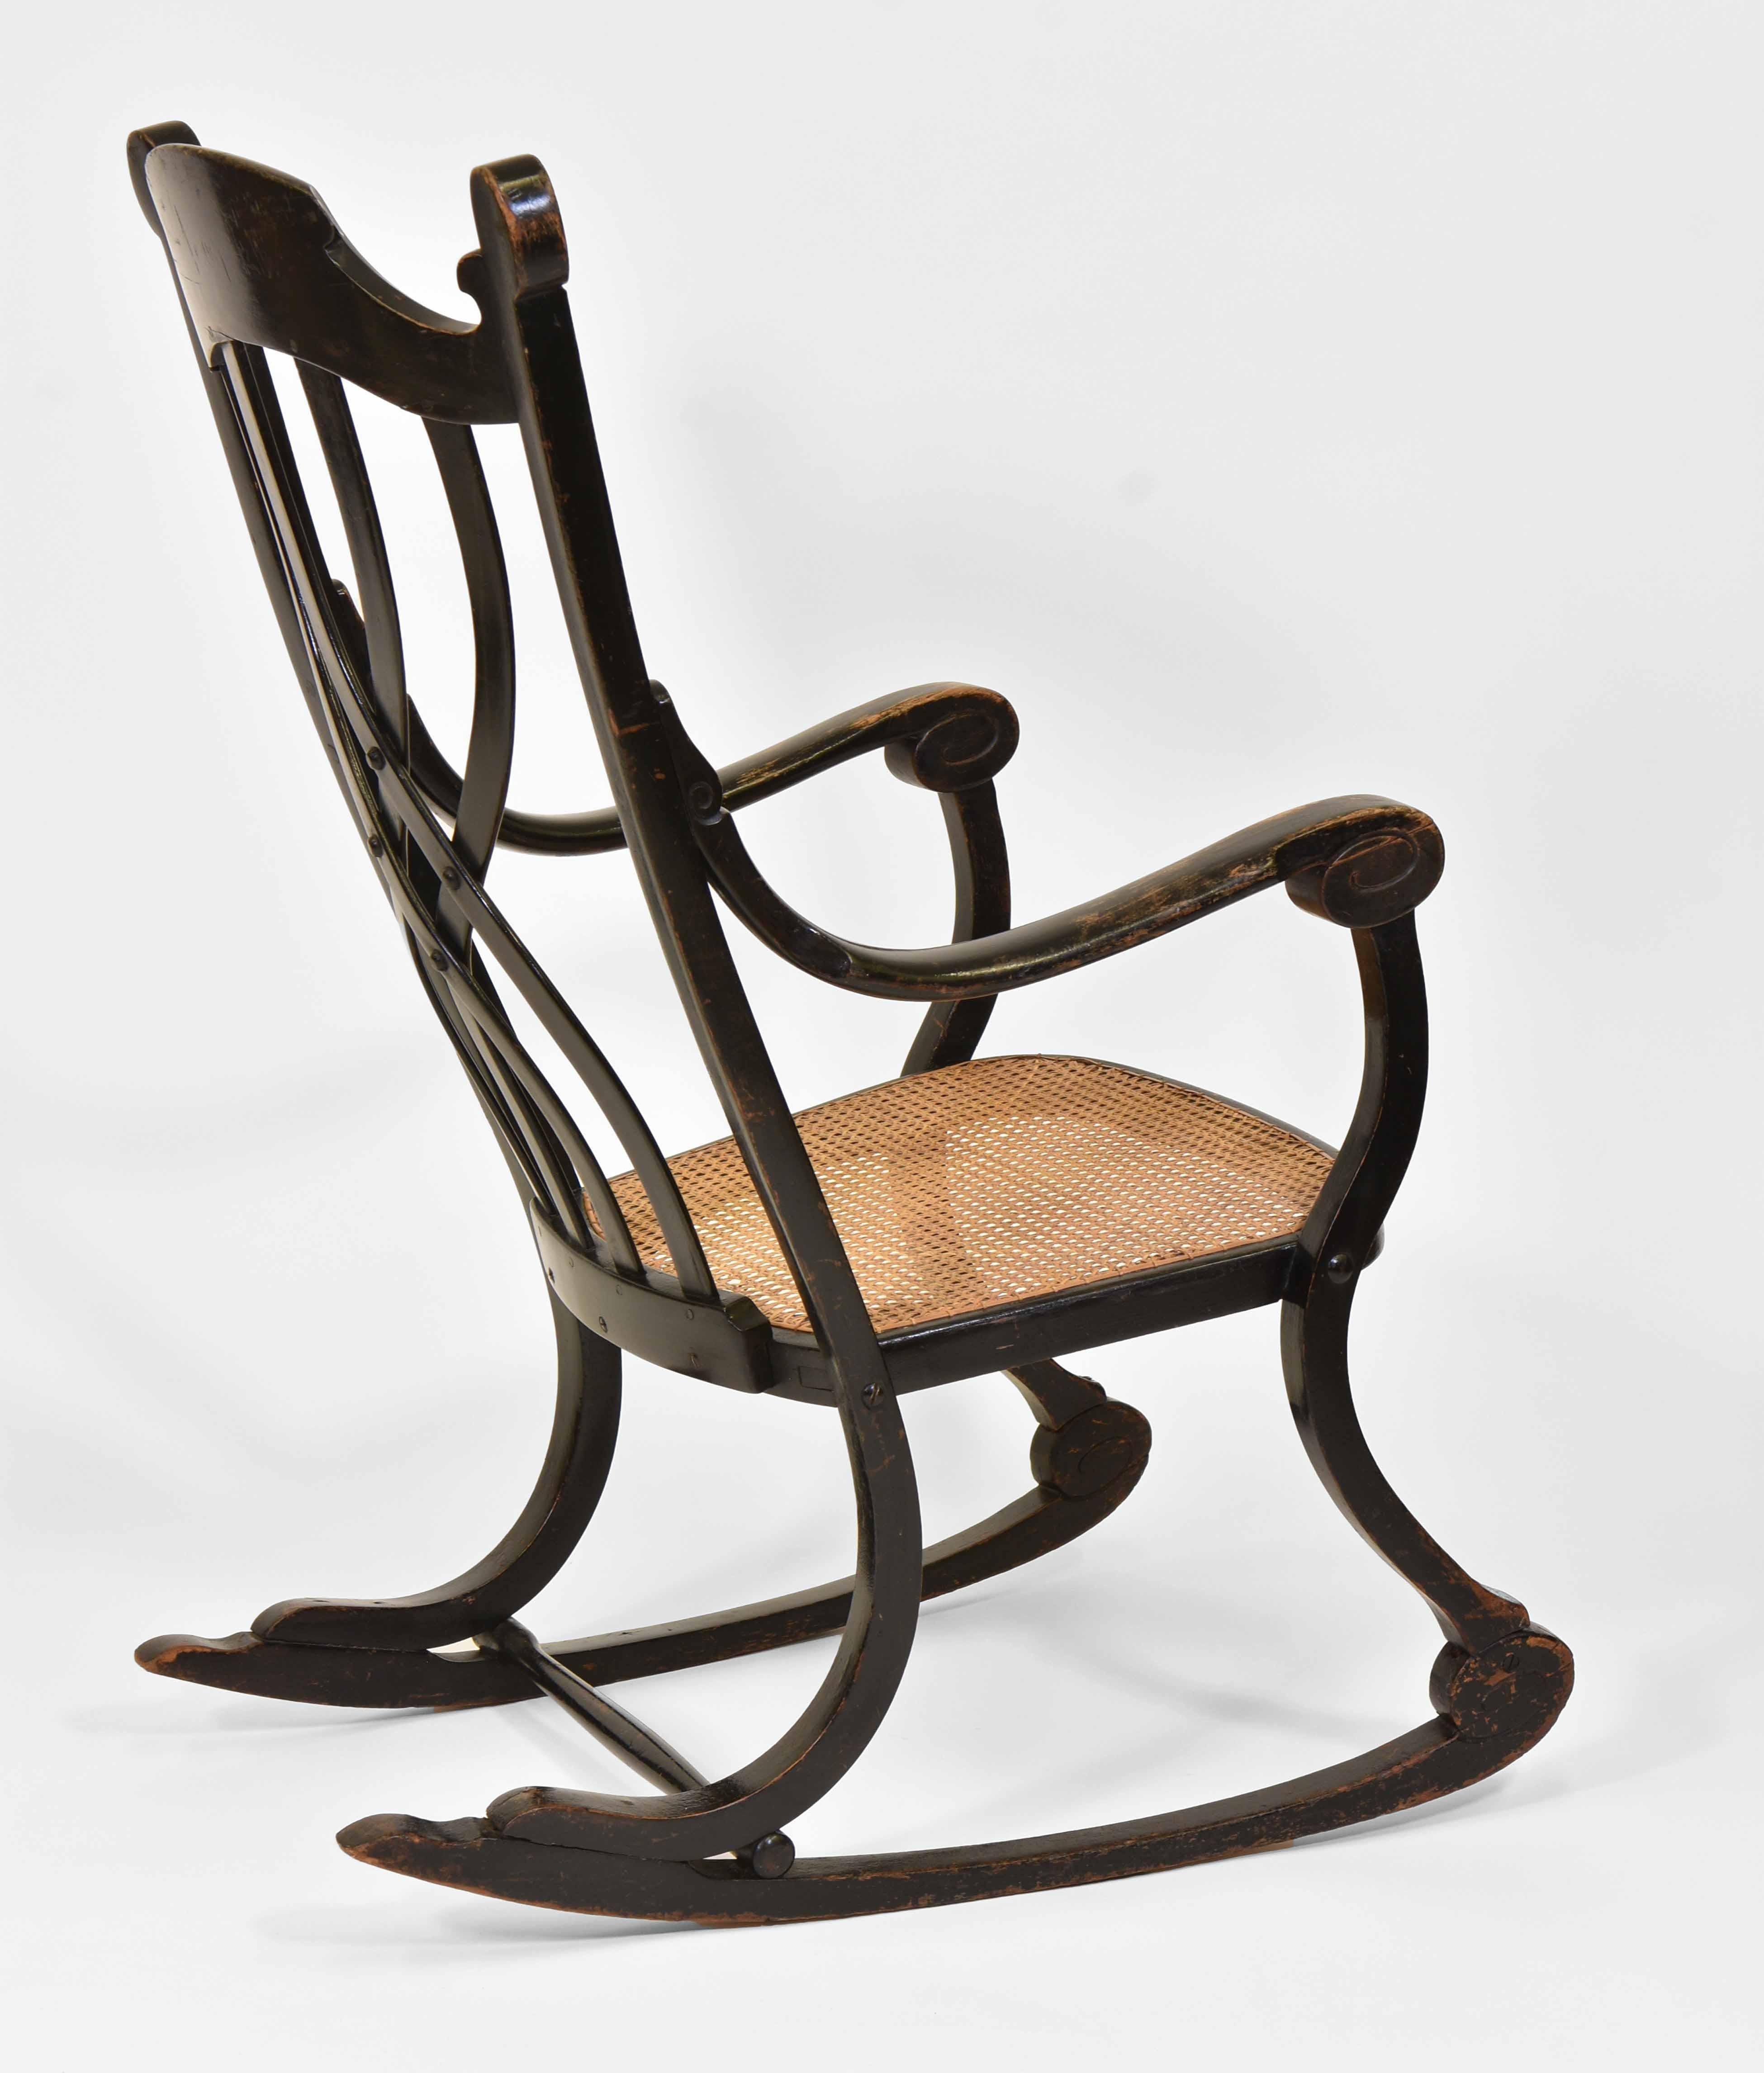 Rare Art Nouveau period Thonet swing chair, model 7401. Circa 1905. Faint stamp - Thonet Austria. 

The chair was probably blackened at some point, and considering the wear on the finish it would have been done a long time ago. The cane seat has